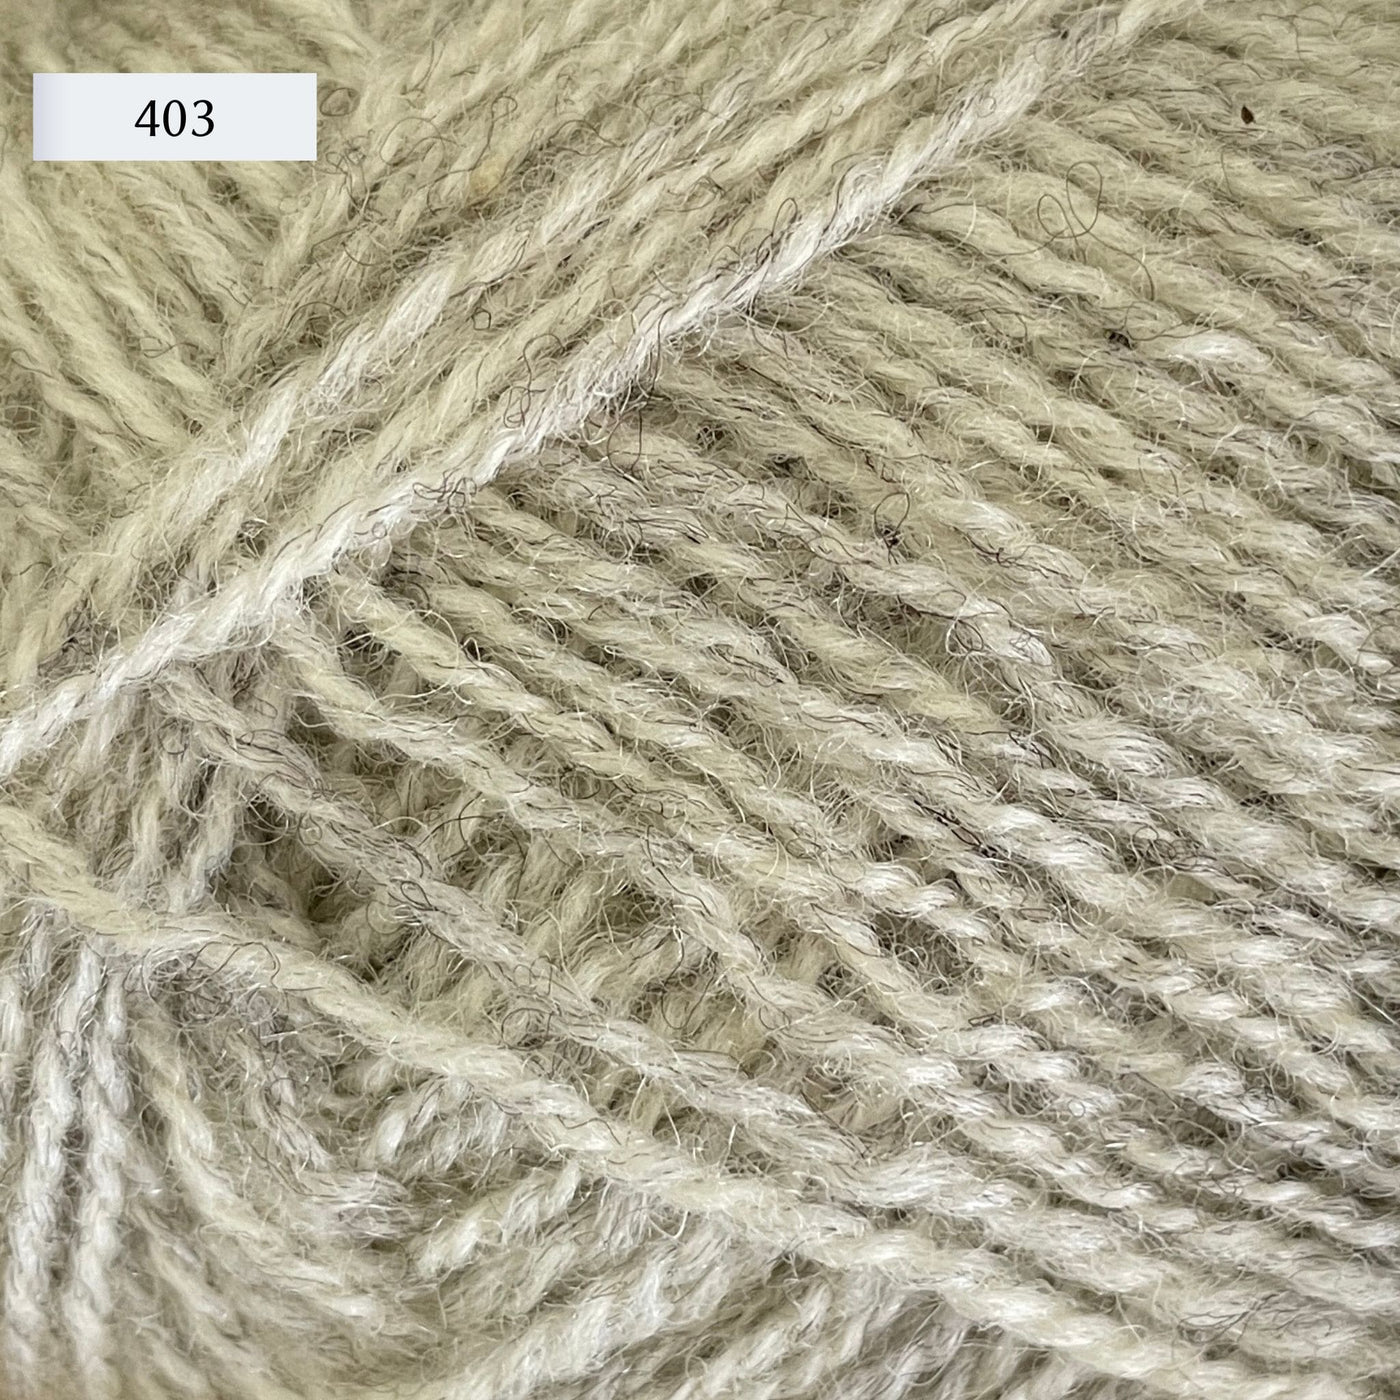 Rauma Gammelserie 2ply wool yarn, fingering weight, in color 403, a heathered very light grey